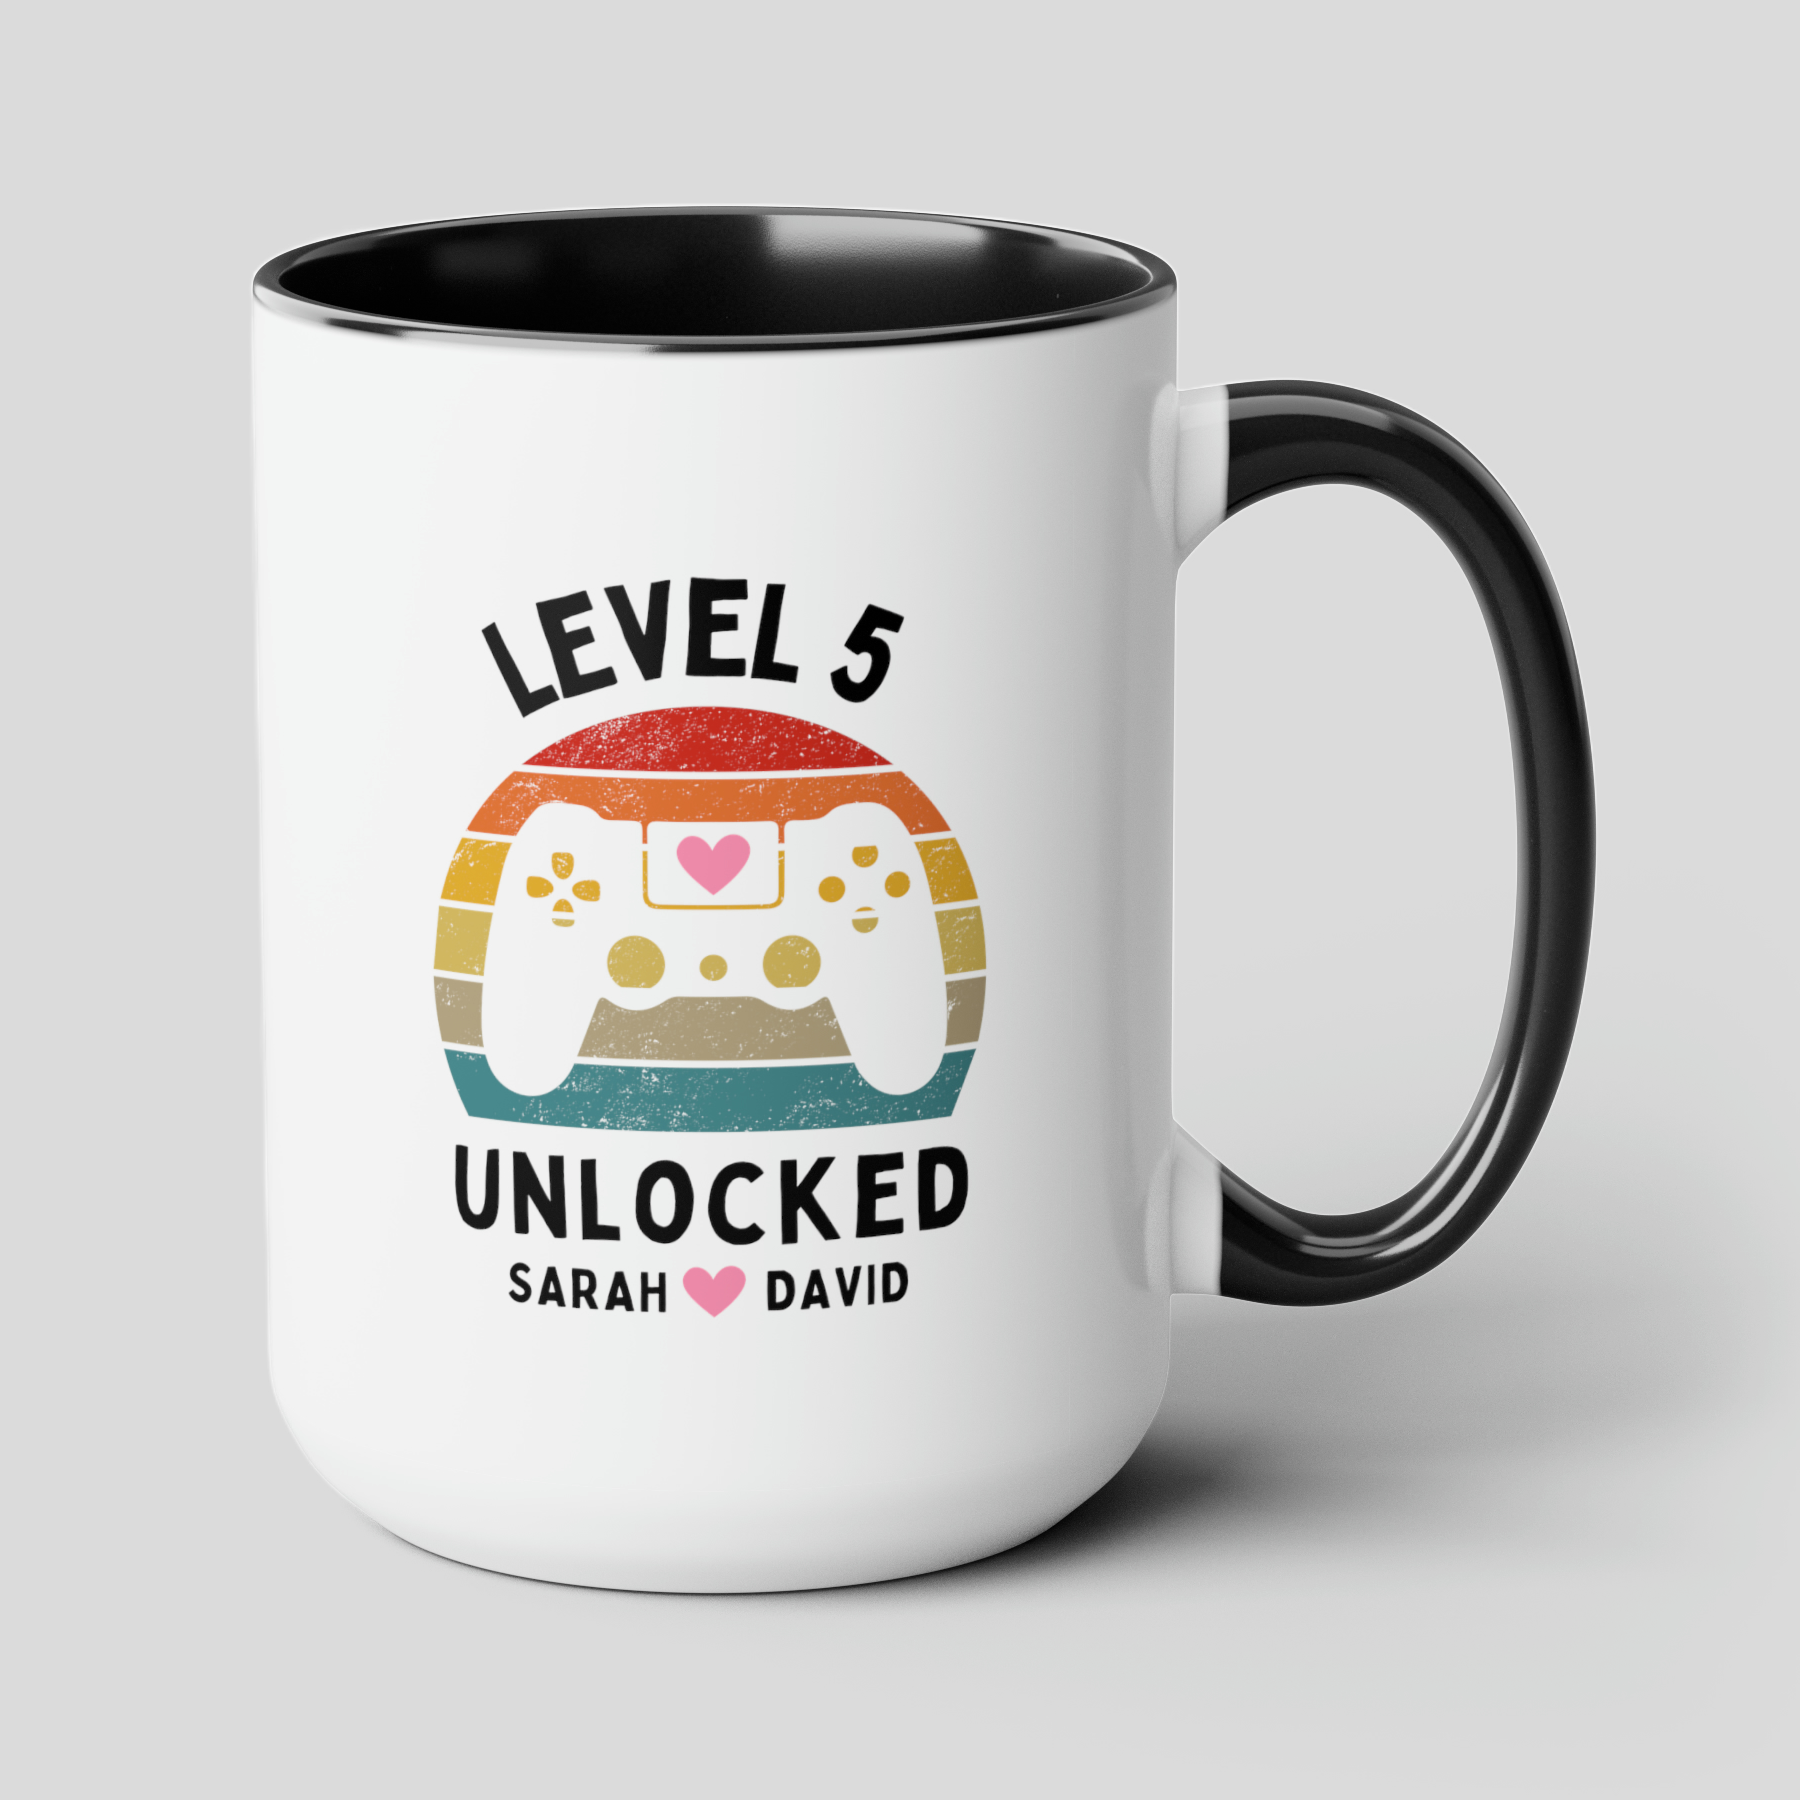 Level Unlocked 15oz white with black accent funny large coffee mug gift for husband wife wedding anniversary retro video game gamer custom date personalize customize waveywares wavey wares wavywares wavy wares cover